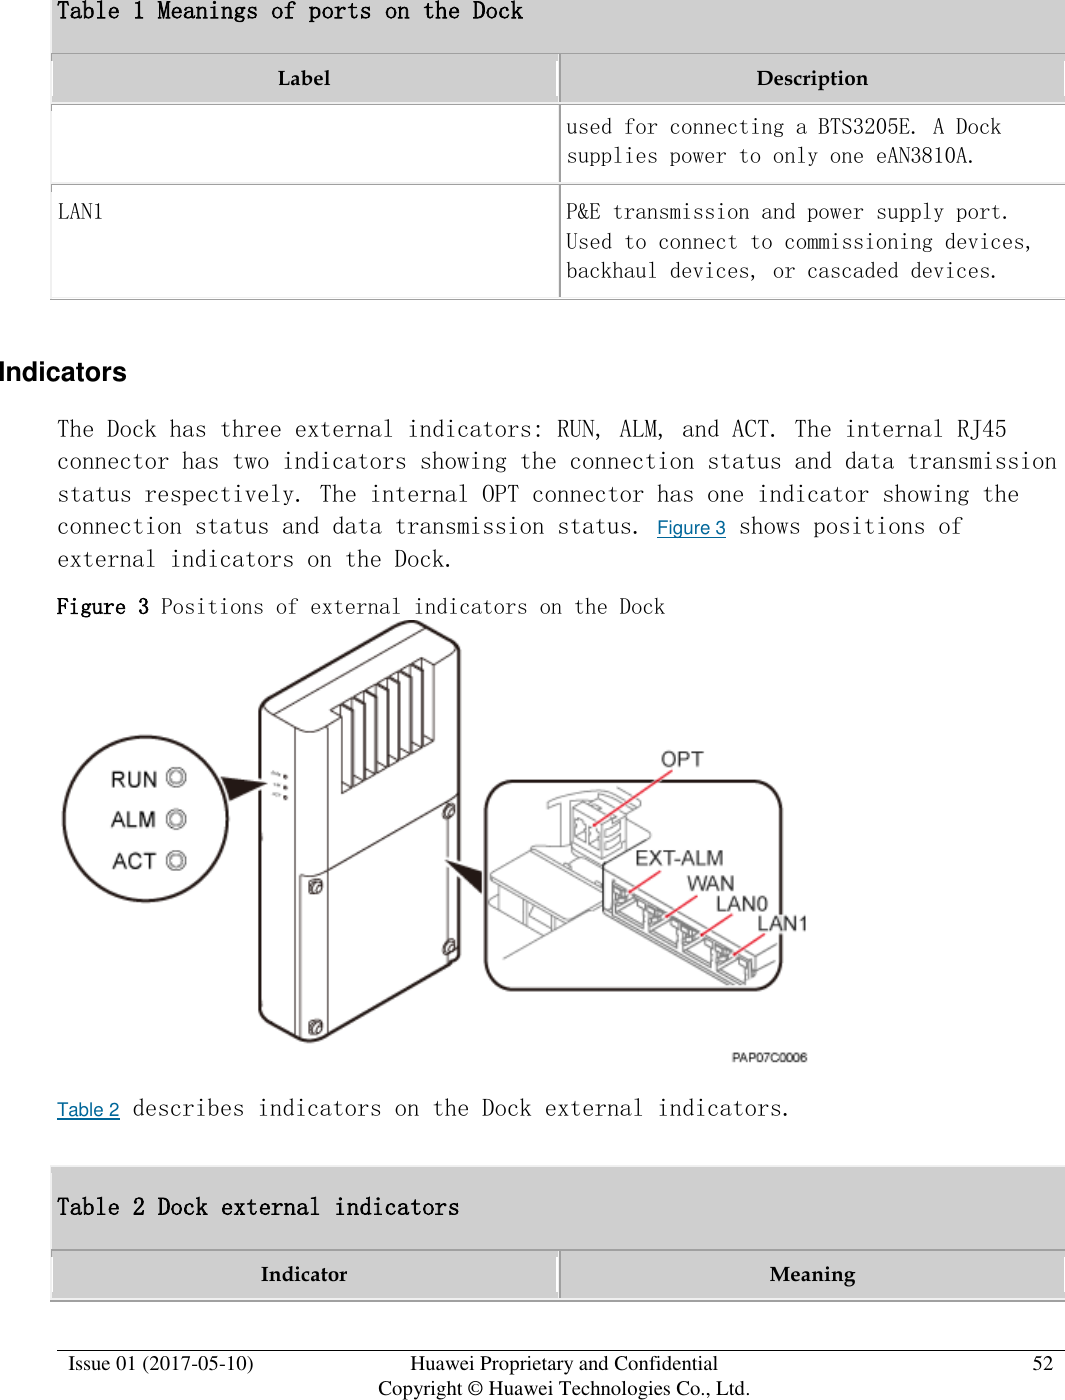  Issue 01 (2017-05-10) Huawei Proprietary and Confidential      Copyright © Huawei Technologies Co., Ltd. 52  Table 1 Meanings of ports on the Dock Label Description used for connecting a BTS3205E. A Dock supplies power to only one eAN3810A. LAN1 P&amp;E transmission and power supply port. Used to connect to commissioning devices, backhaul devices, or cascaded devices. Indicators The Dock has three external indicators: RUN, ALM, and ACT. The internal RJ45 connector has two indicators showing the connection status and data transmission status respectively. The internal OPT connector has one indicator showing the connection status and data transmission status. Figure 3 shows positions of external indicators on the Dock. Figure 3 Positions of external indicators on the Dock   Table 2 describes indicators on the Dock external indicators.  Table 2 Dock external indicators Indicator Meaning 